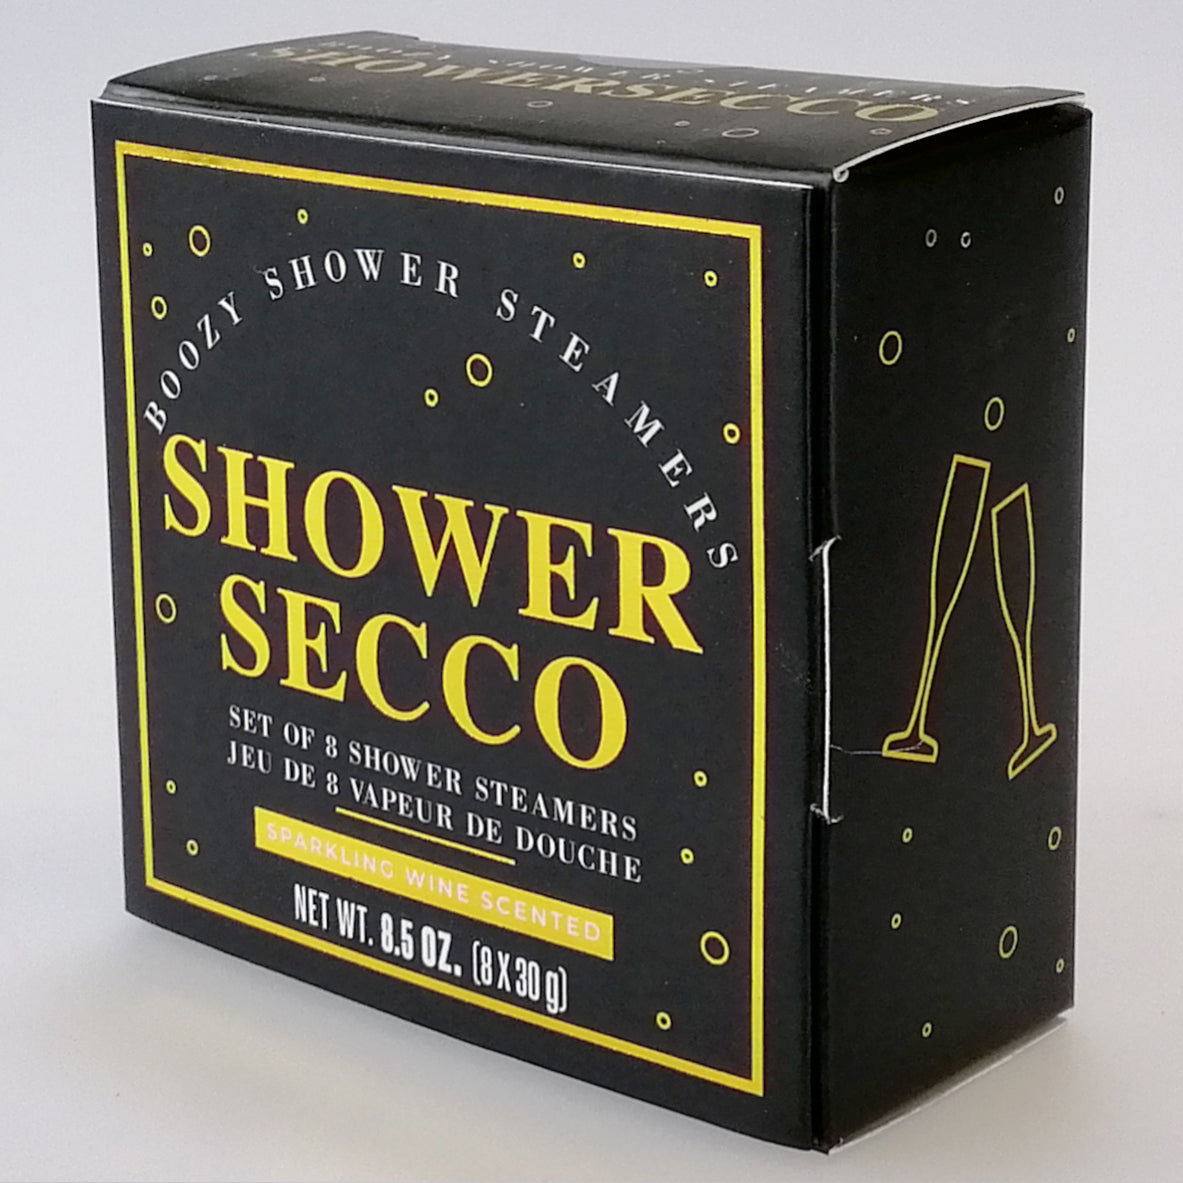 Shower Secco' Boozy Shower Steamers - Set of 8